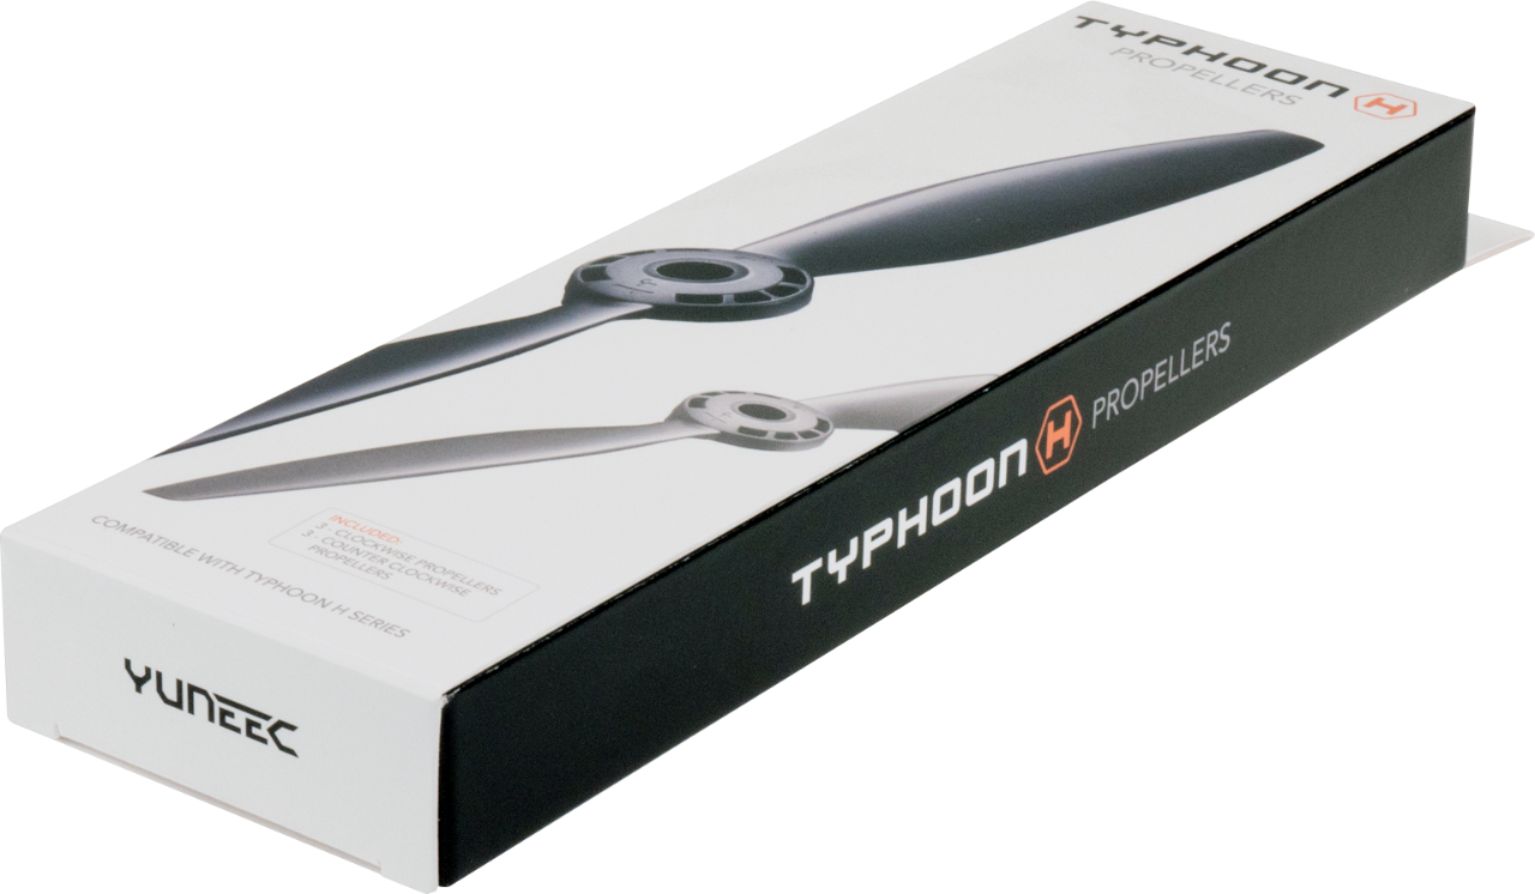  Propellers for YUNEEC Typhoon H - Black